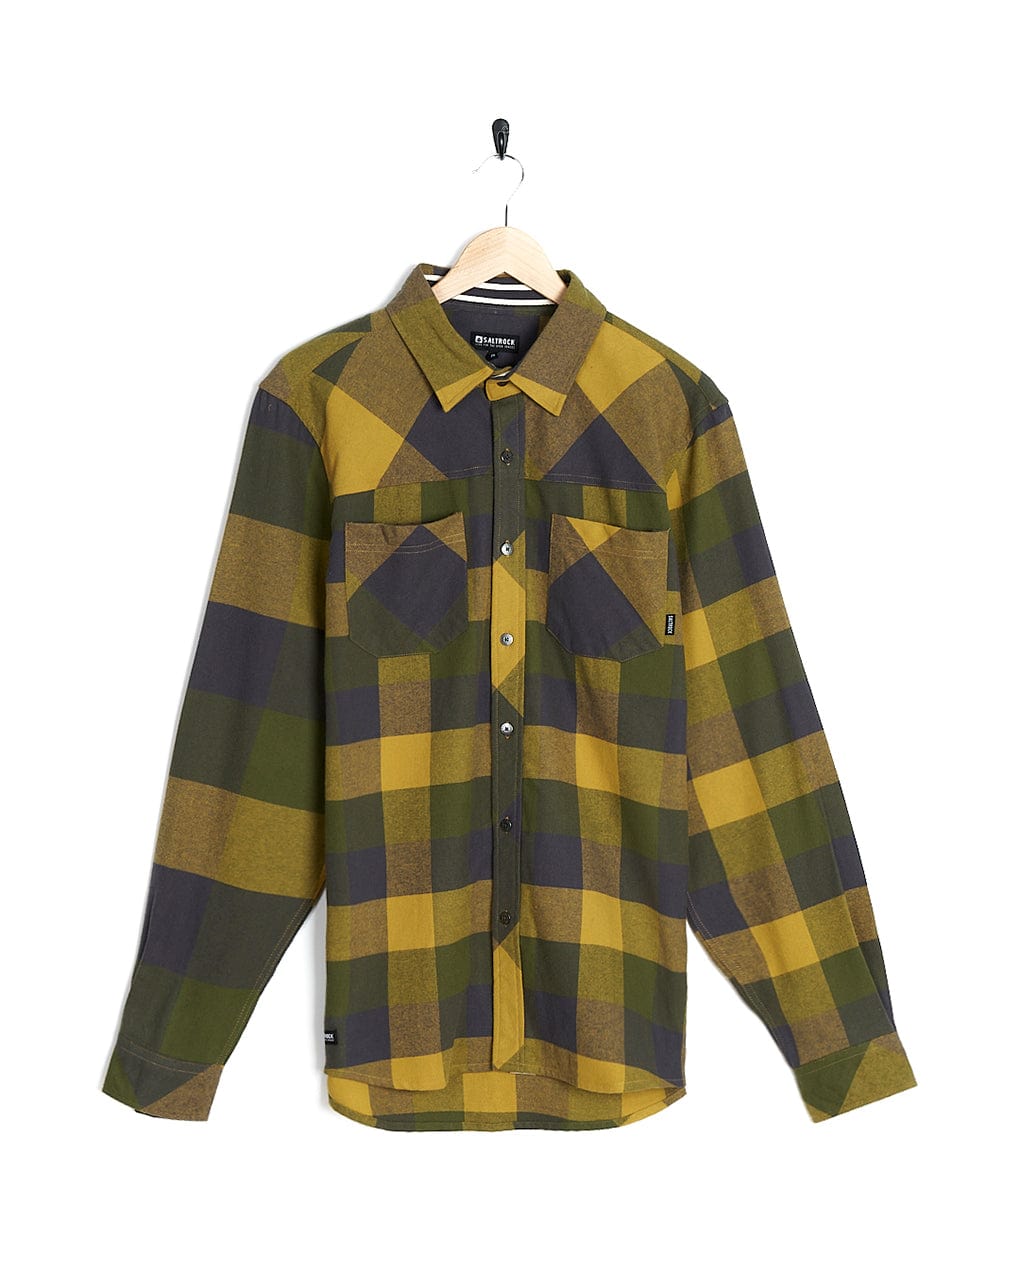 A yellow and black plaid Saltrock shirt hanging on a hanger.